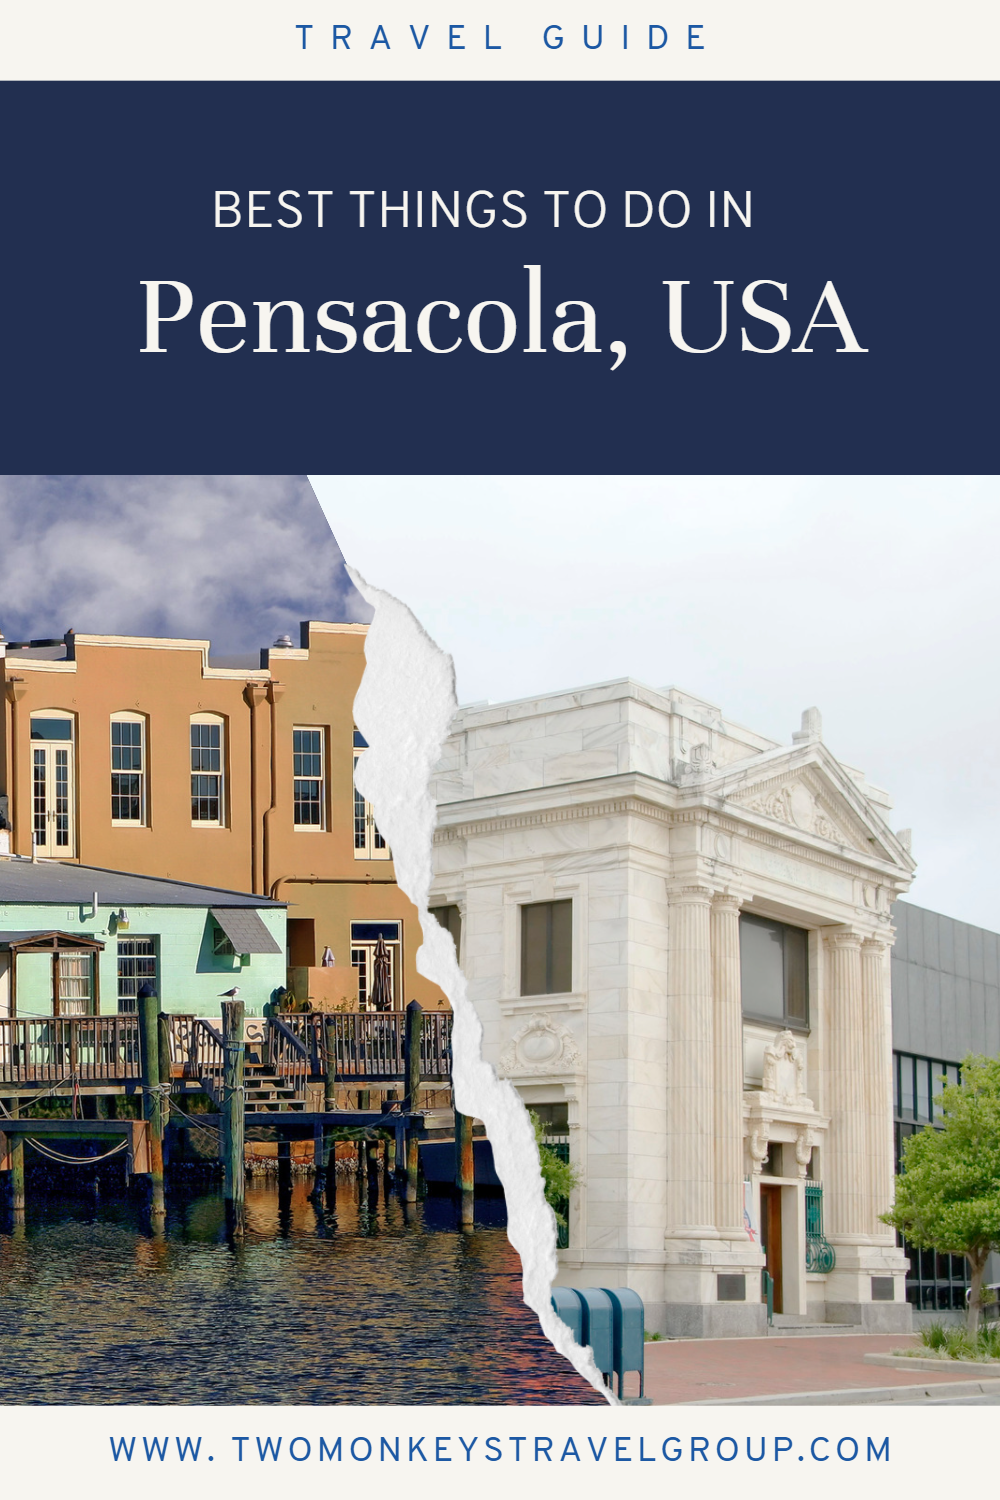 6 Best Things To Do in Pensacola 2